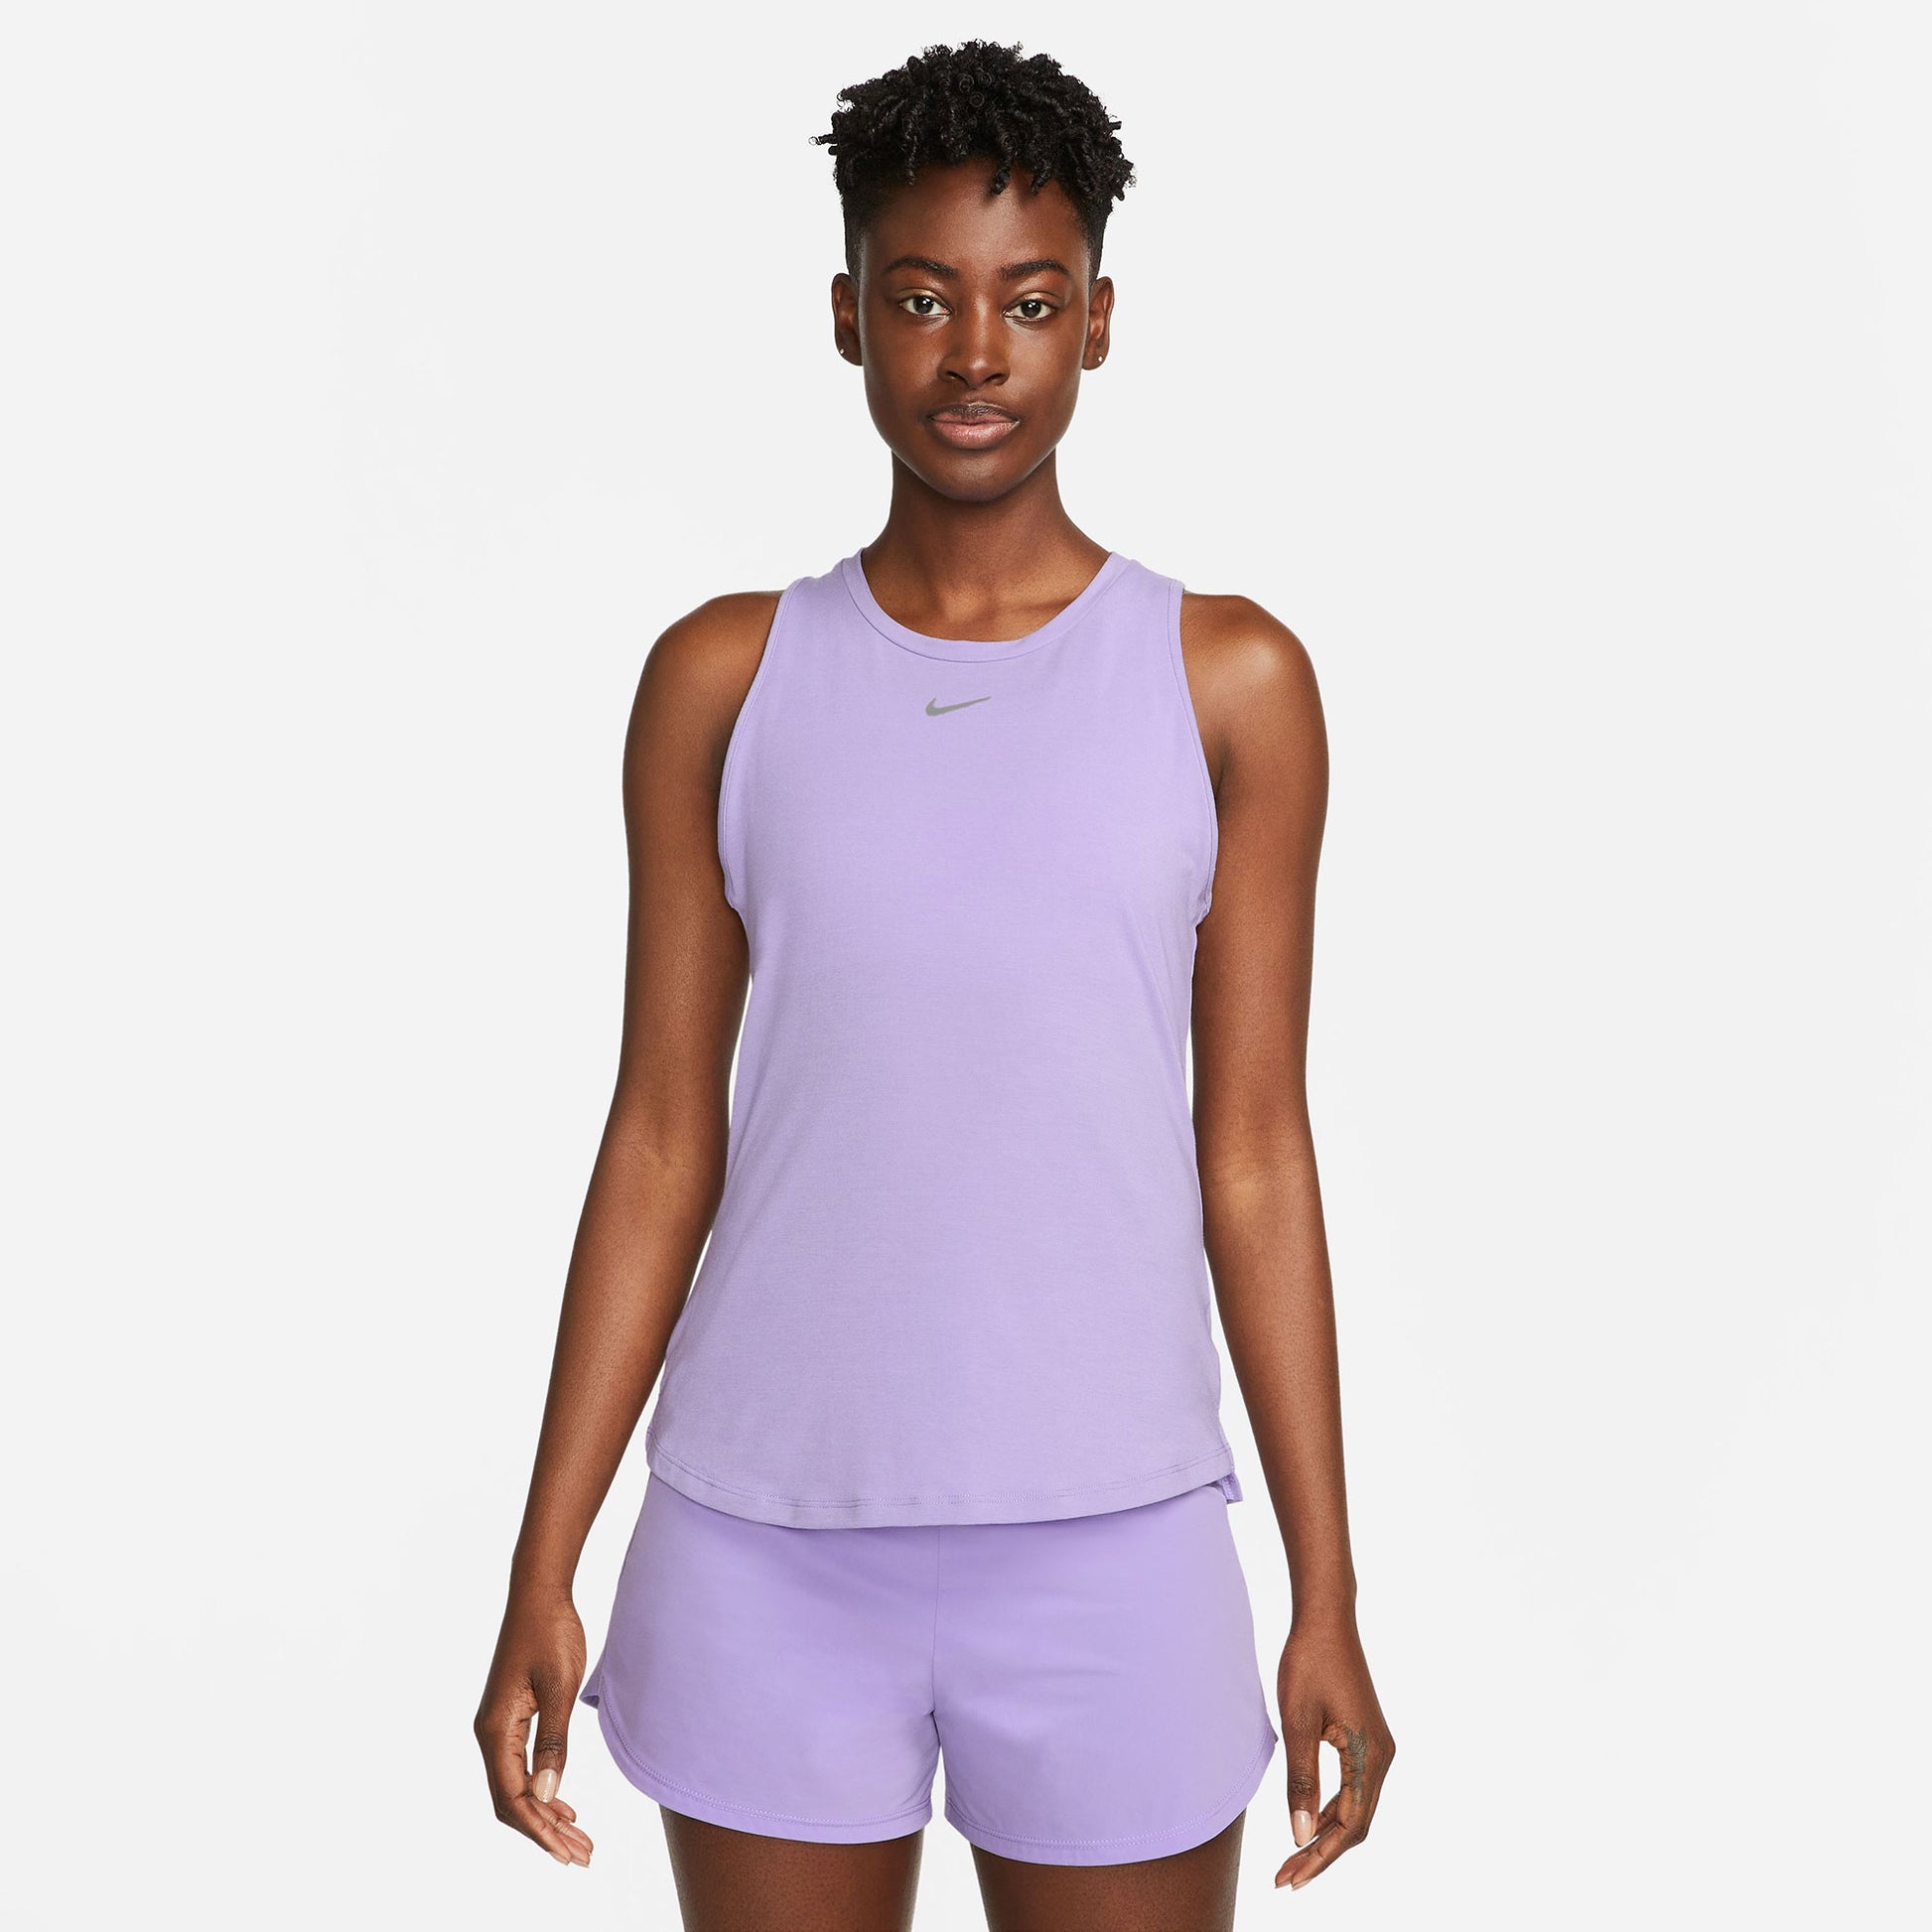 Anekdote spanning Kluisje Nike One Luxe Dri-FIT Dames Standaard Fit Tank Paars - Tennis Only